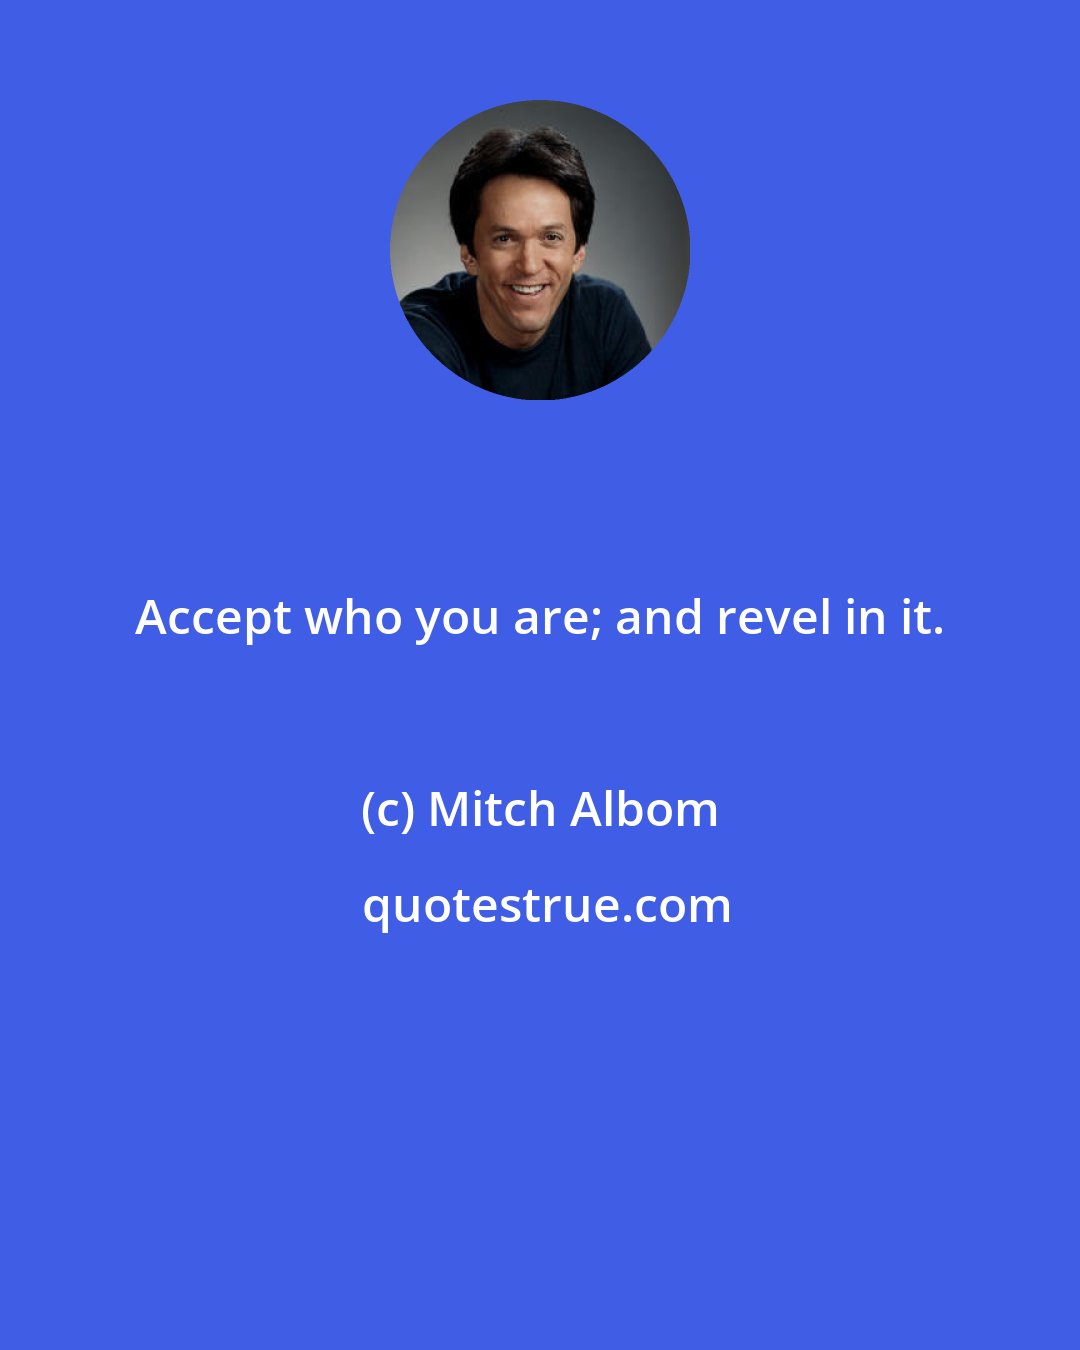 Mitch Albom: Accept who you are; and revel in it.